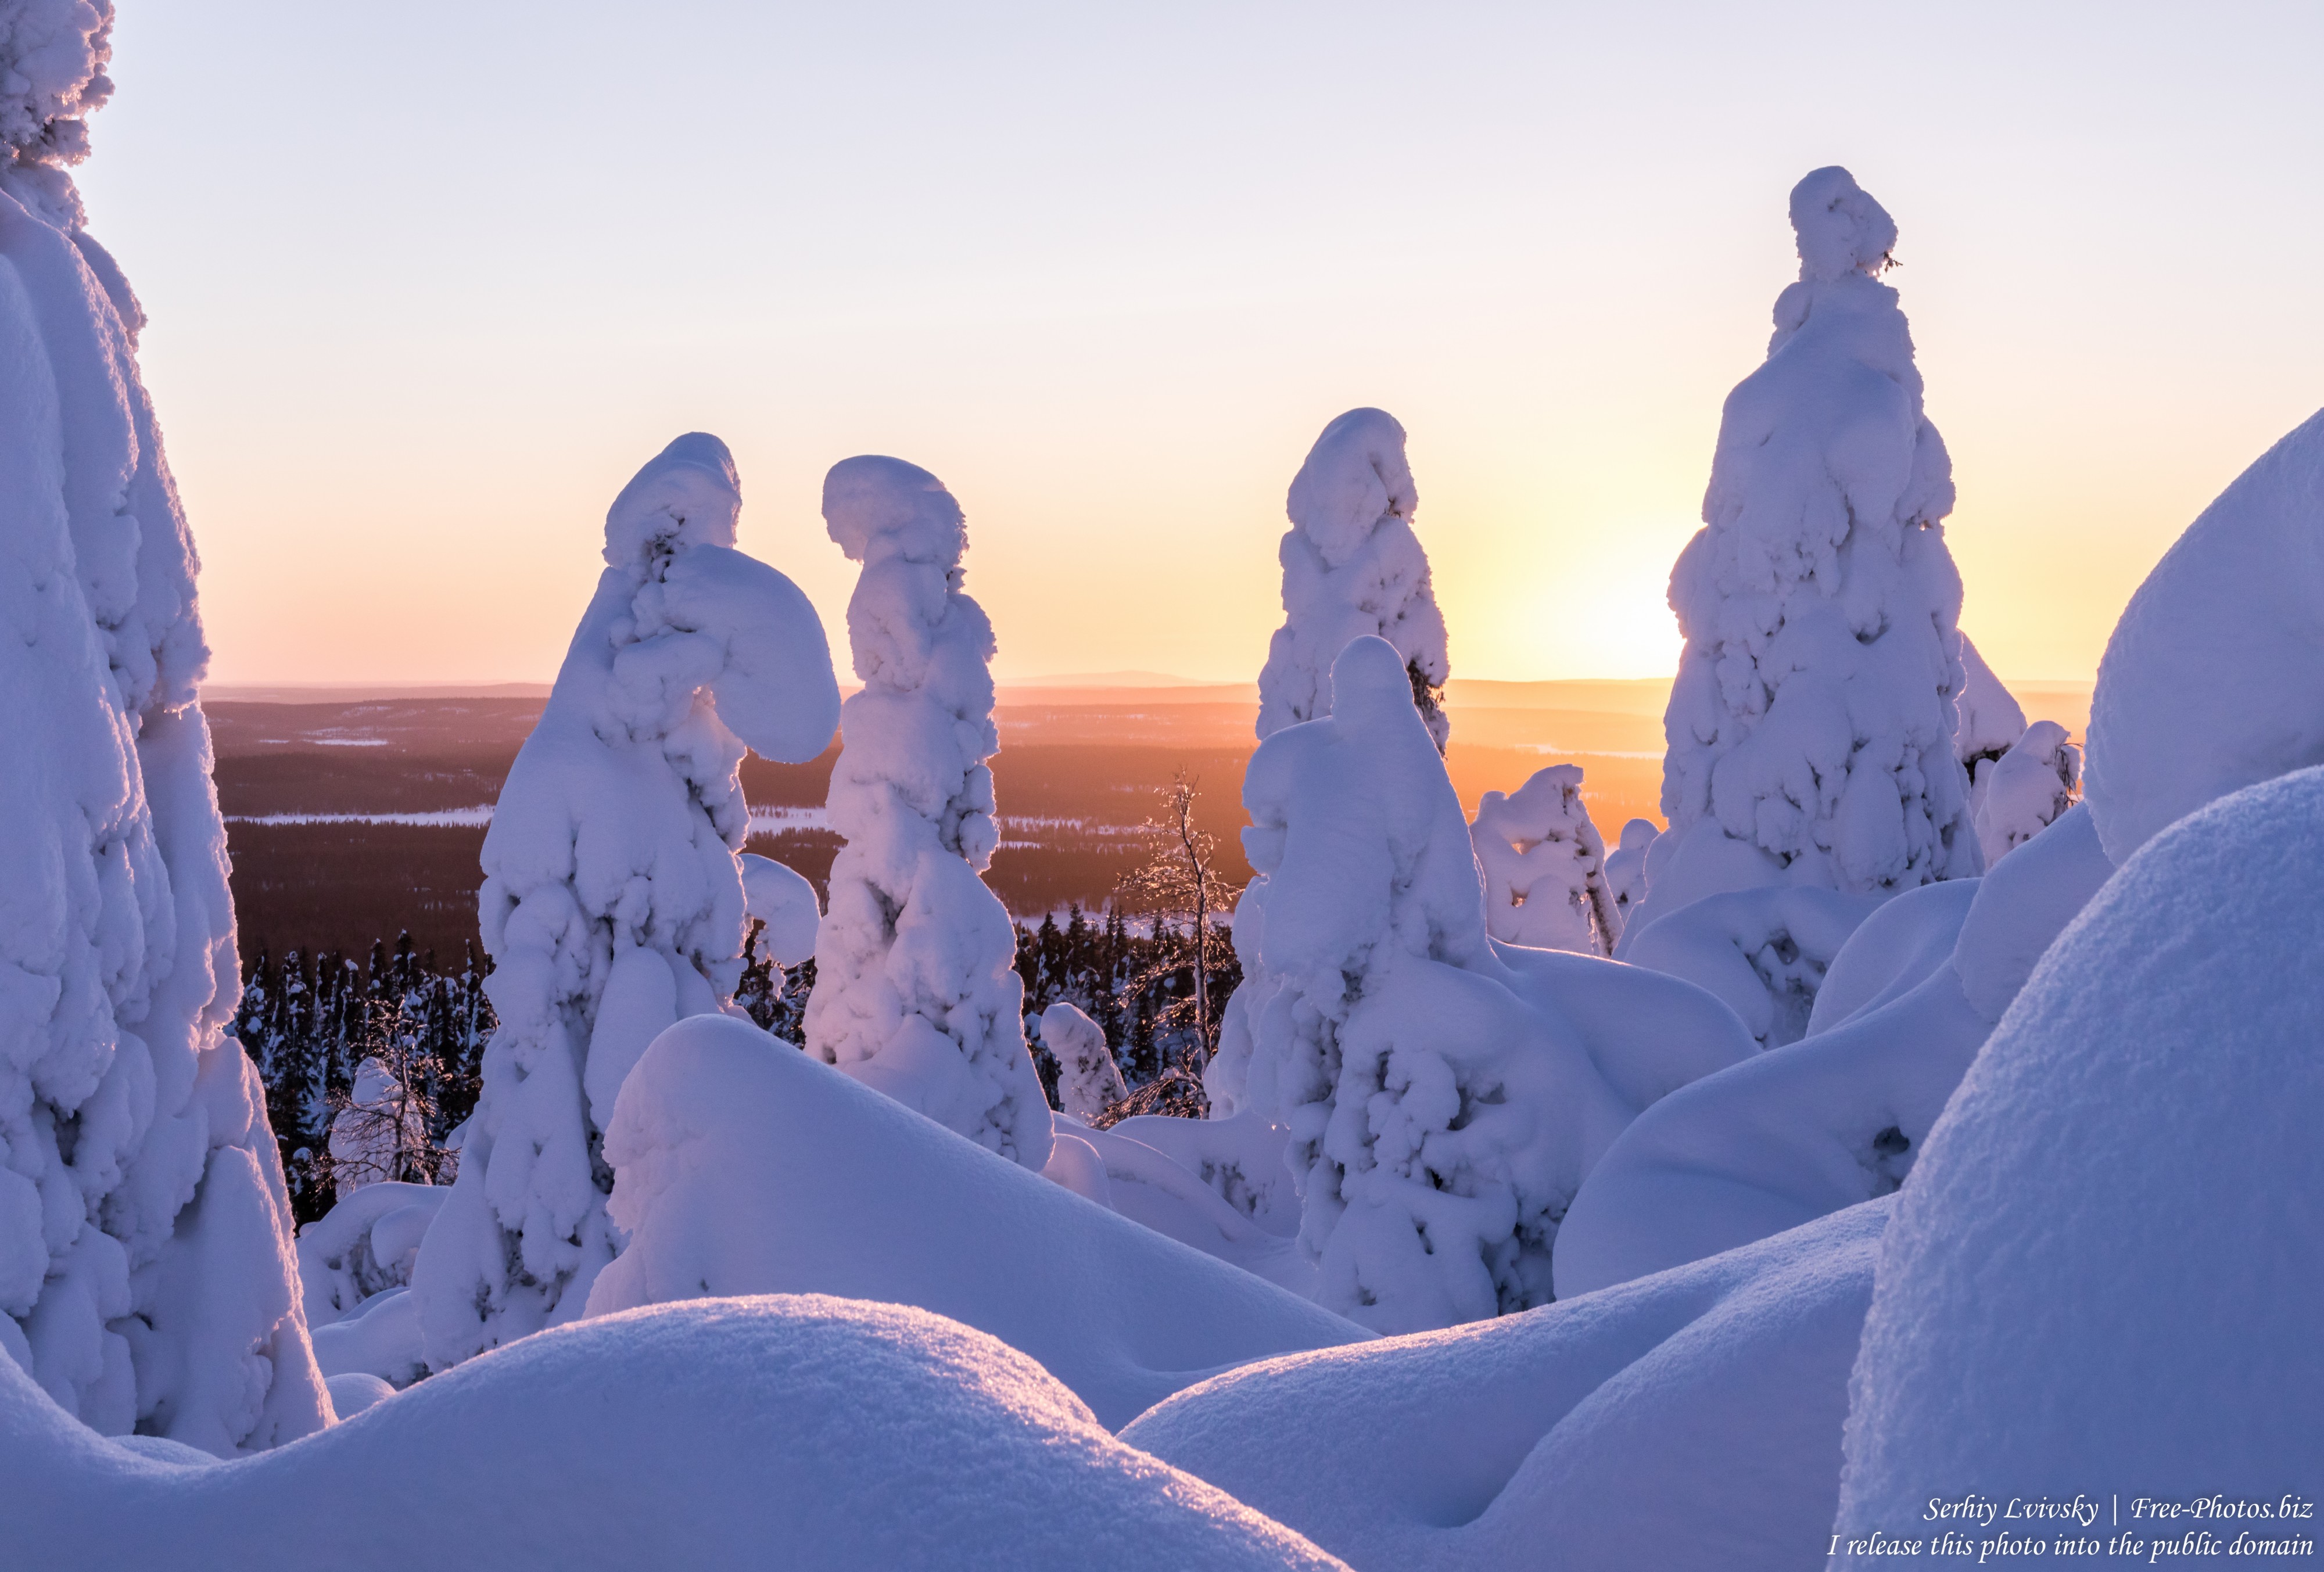 Valtavaara, Finland, photographed in January 2020 by Serhiy Lvivsky, picture 26